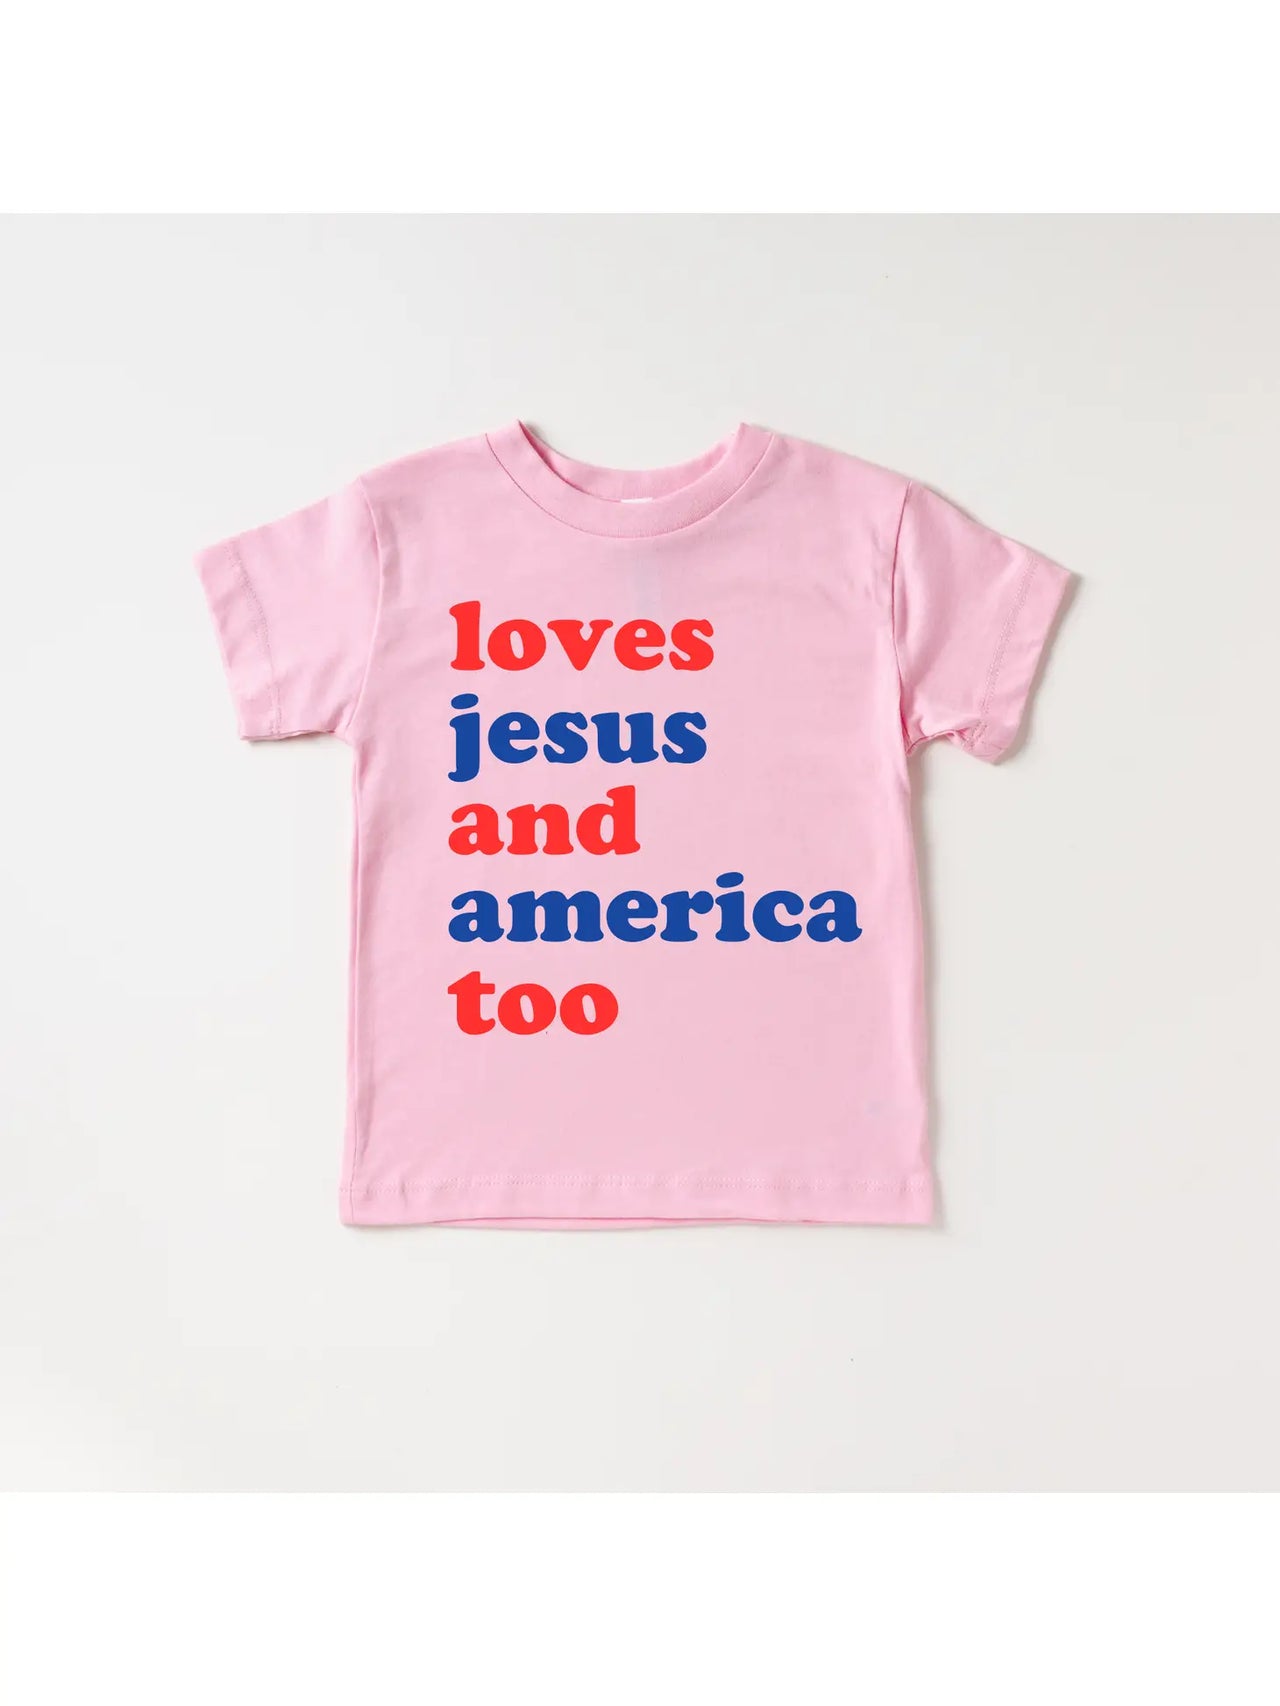 Toddler and Youth T-Shirt || Loves Jesus and America Too